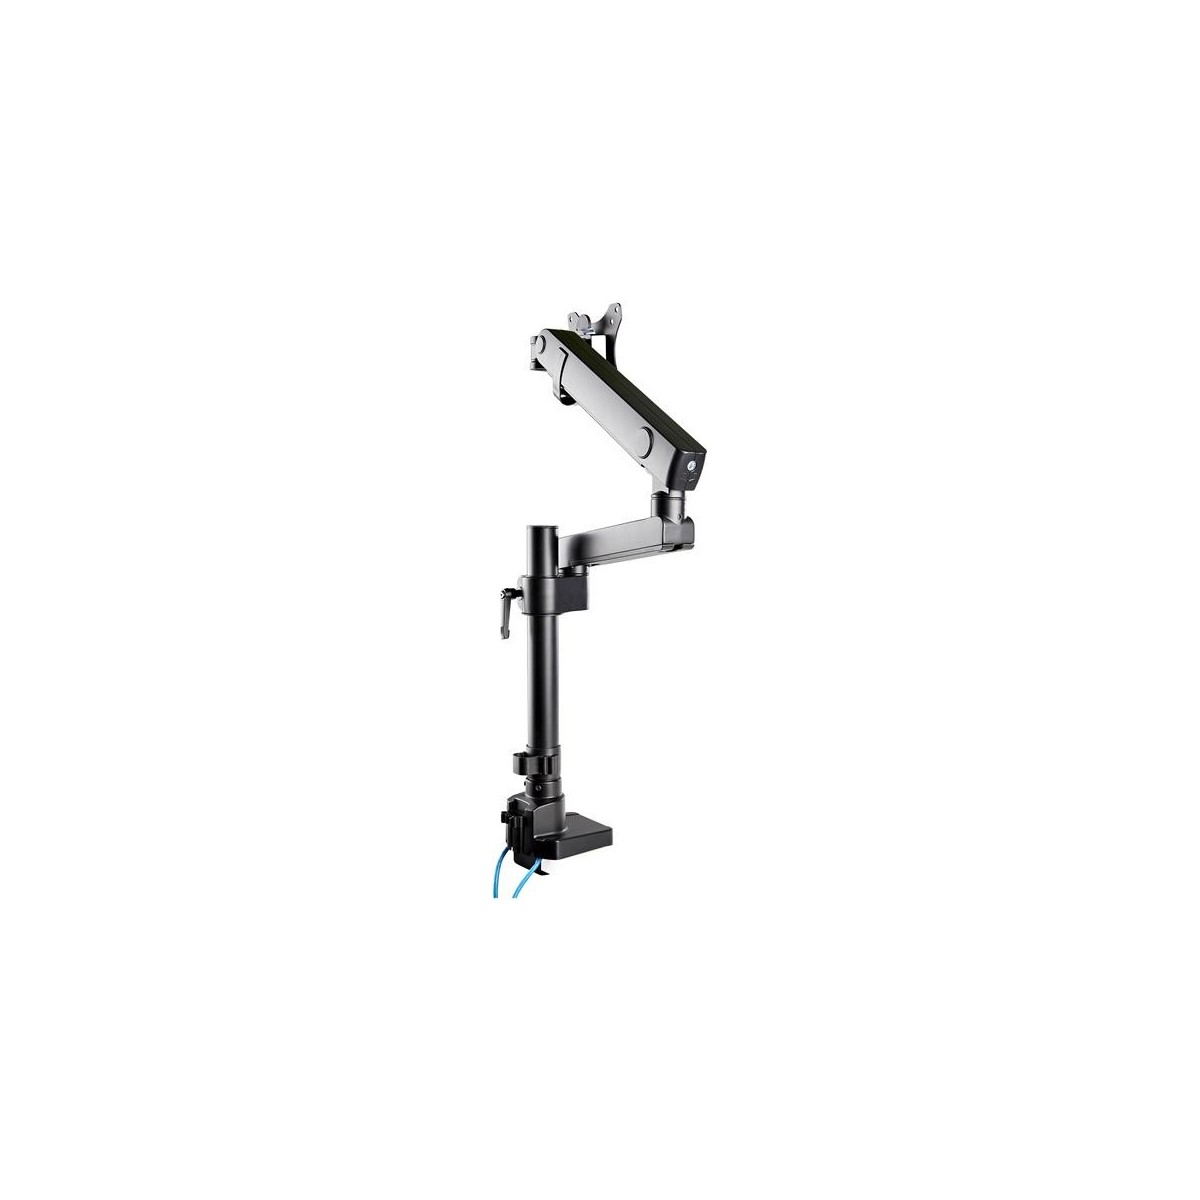 StarTech.com Desk Mount Monitor Arm with 2x USB 3.0 ports - Pole Mount Full Motion Single Arm Monitor Mount for up to 34" VESA D